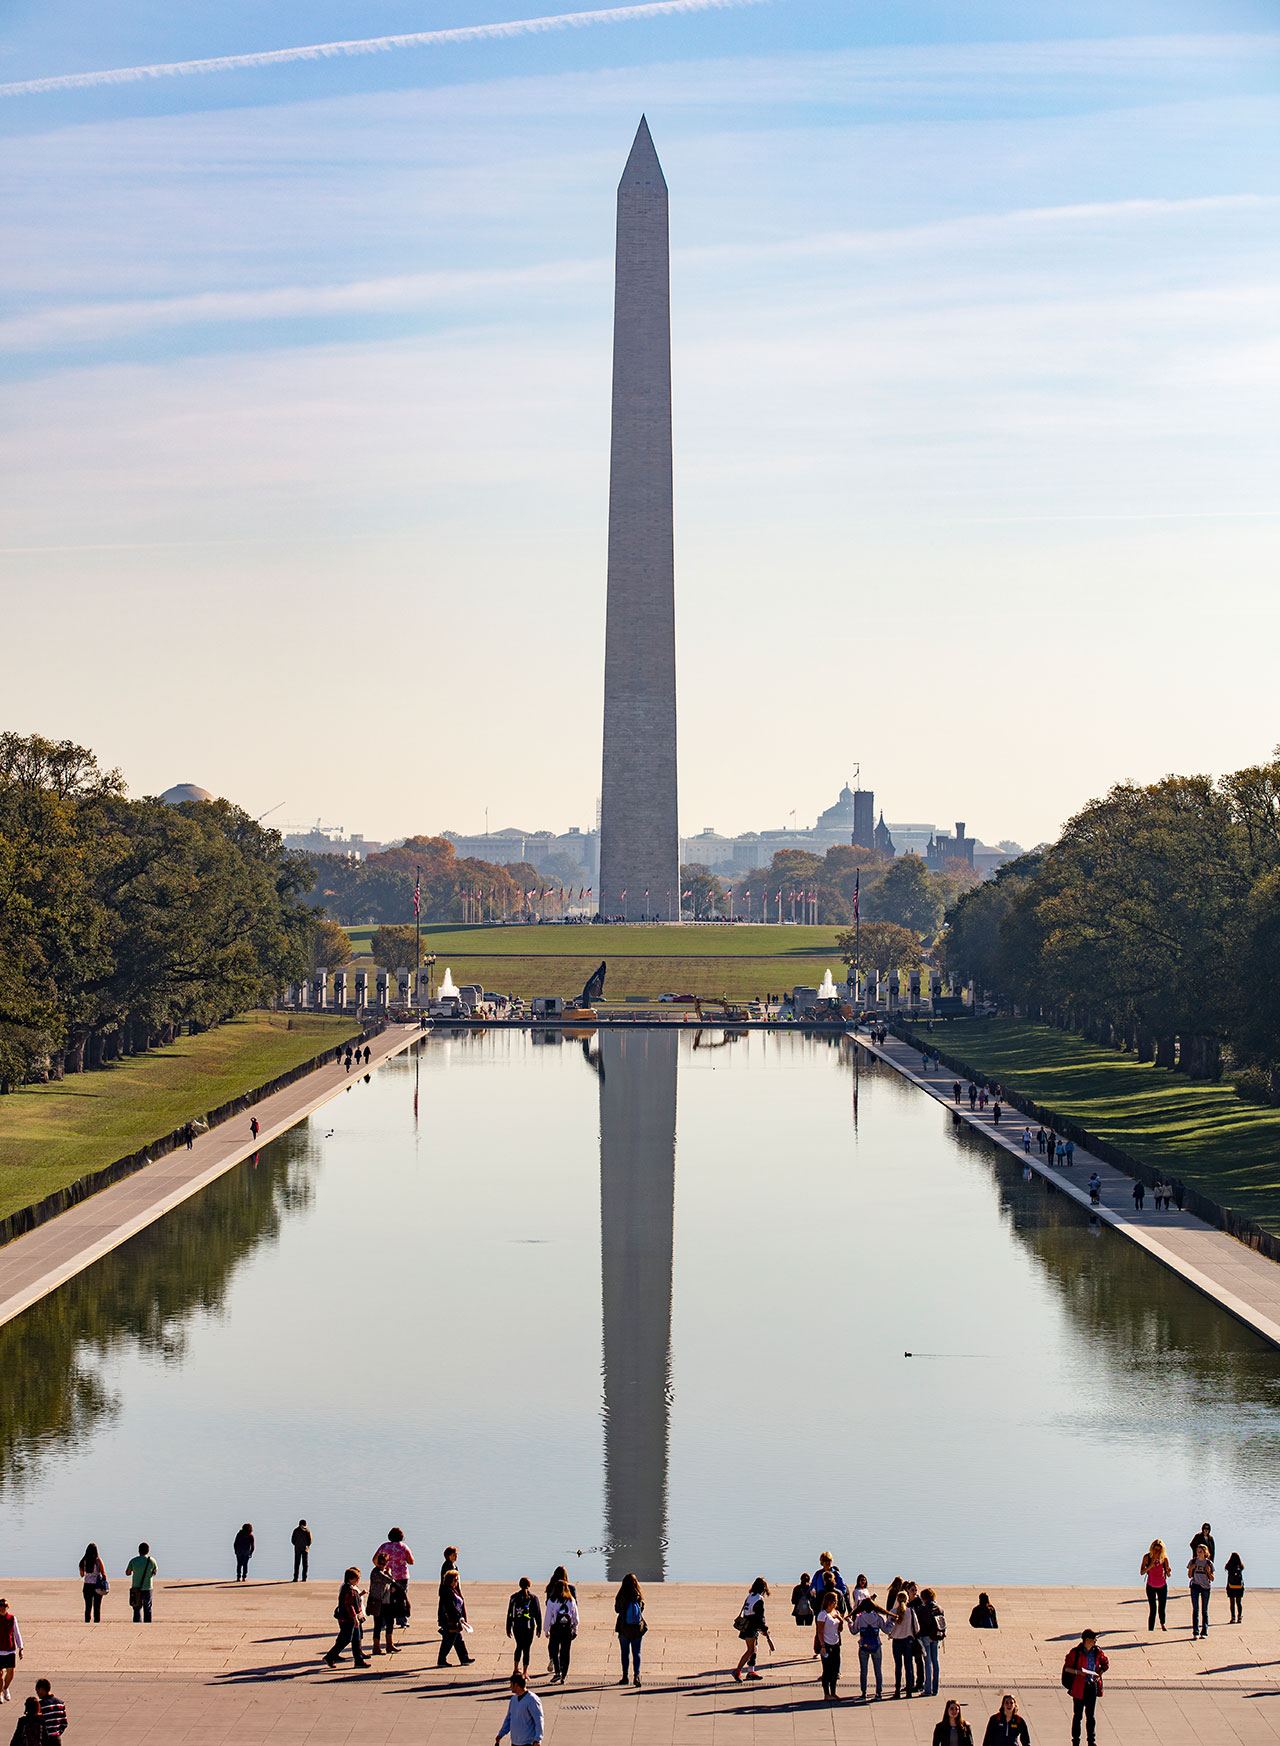 The Lincoln Memorial Reflecting Pool and the Washington Monument.